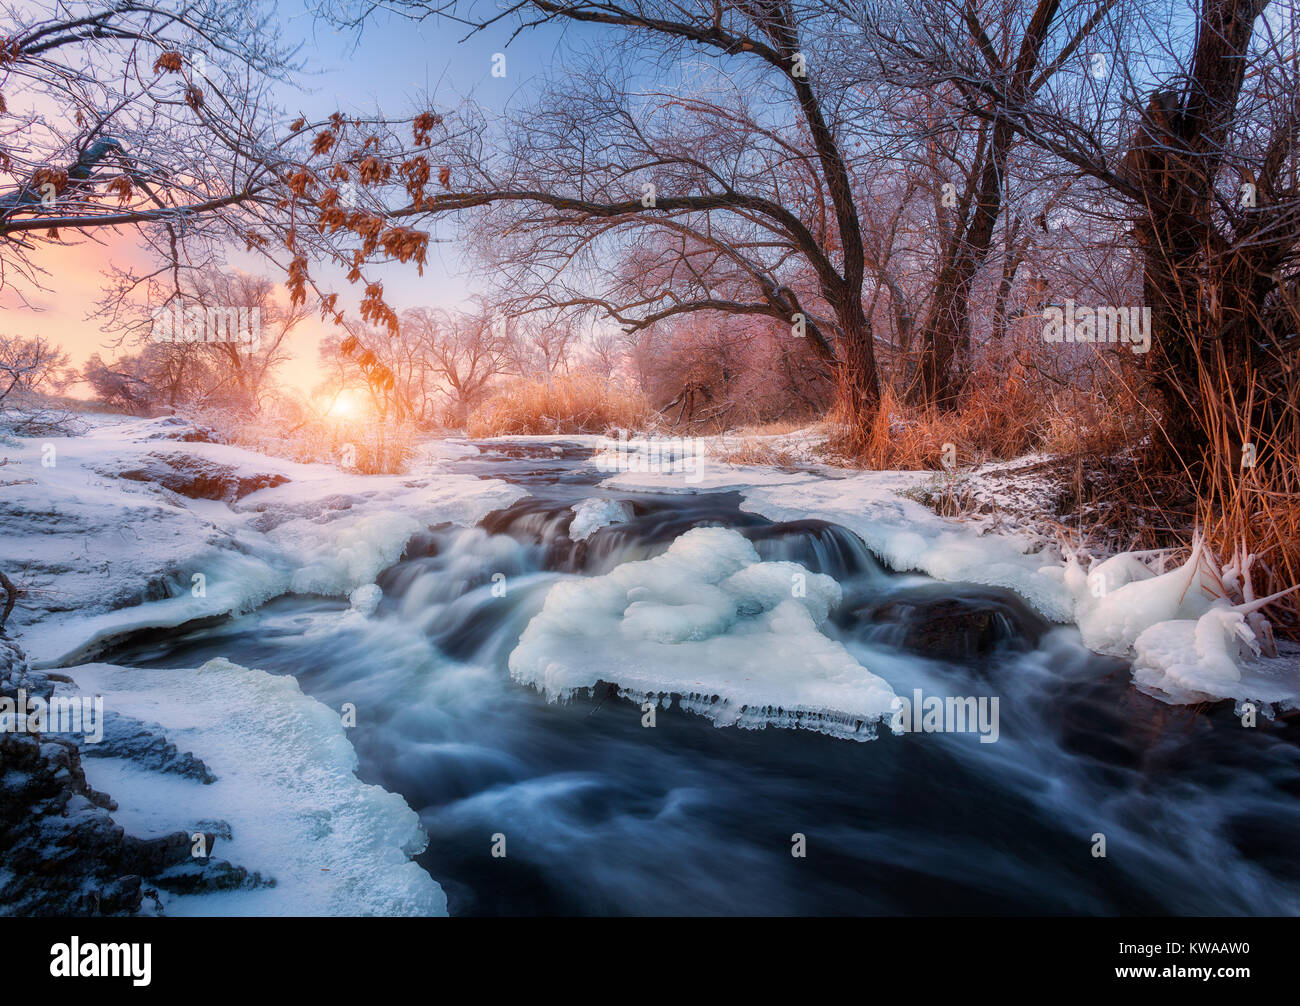 Winter forest with amazing river at sunset. Winter landscape with snowy trees, ice, beautiful frozen river, snowy bushes, colorful sky in dusk. Blurre Stock Photo